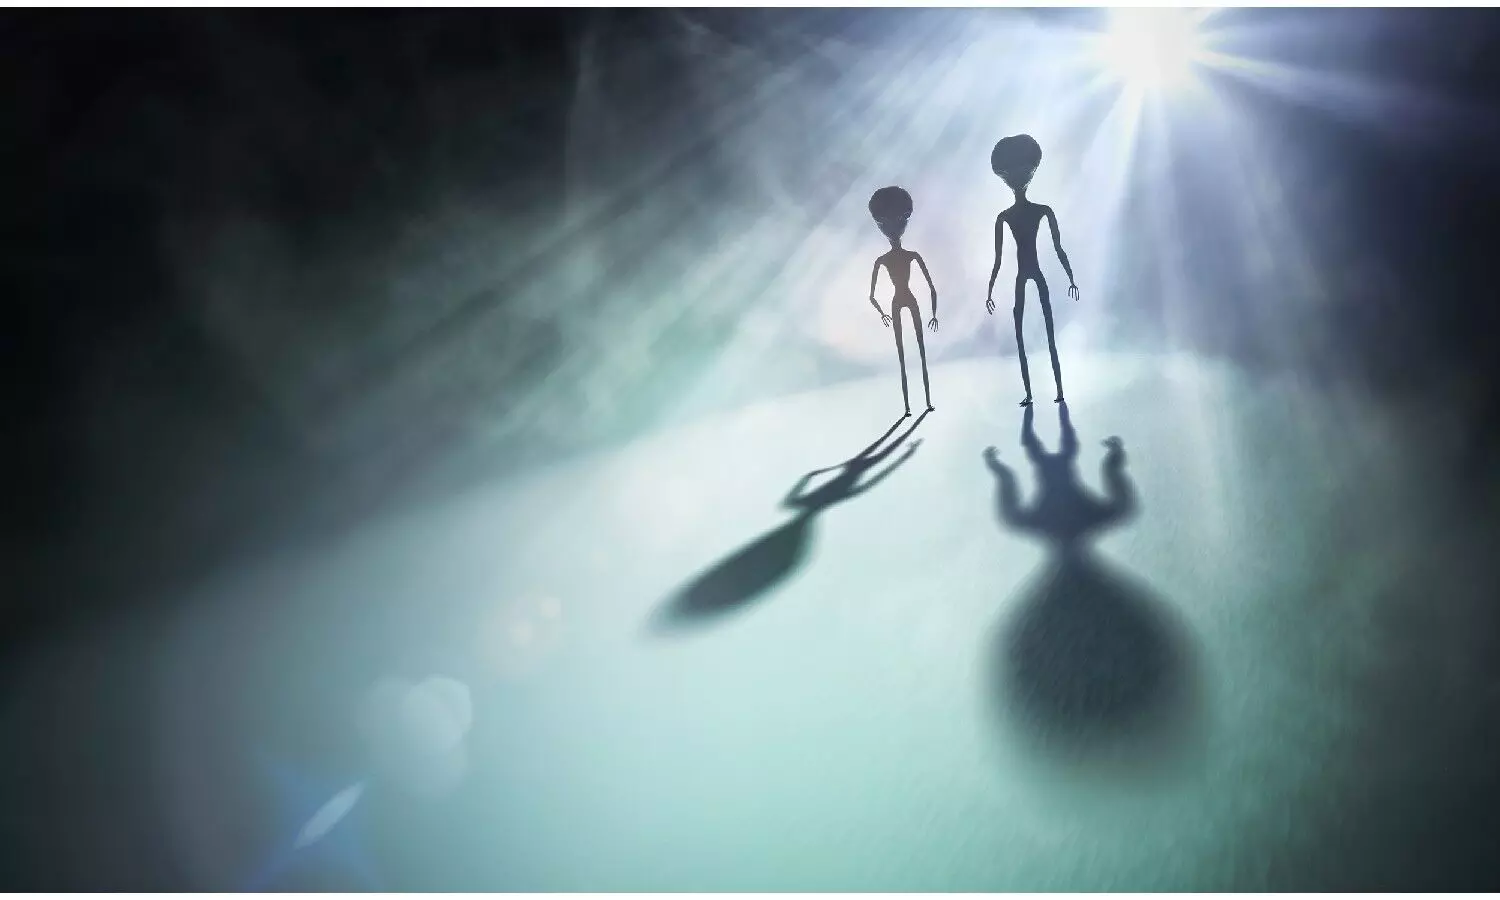 aliens are in full swing former US President Barack Obama has also come in the discussion about the existence of UFOs.